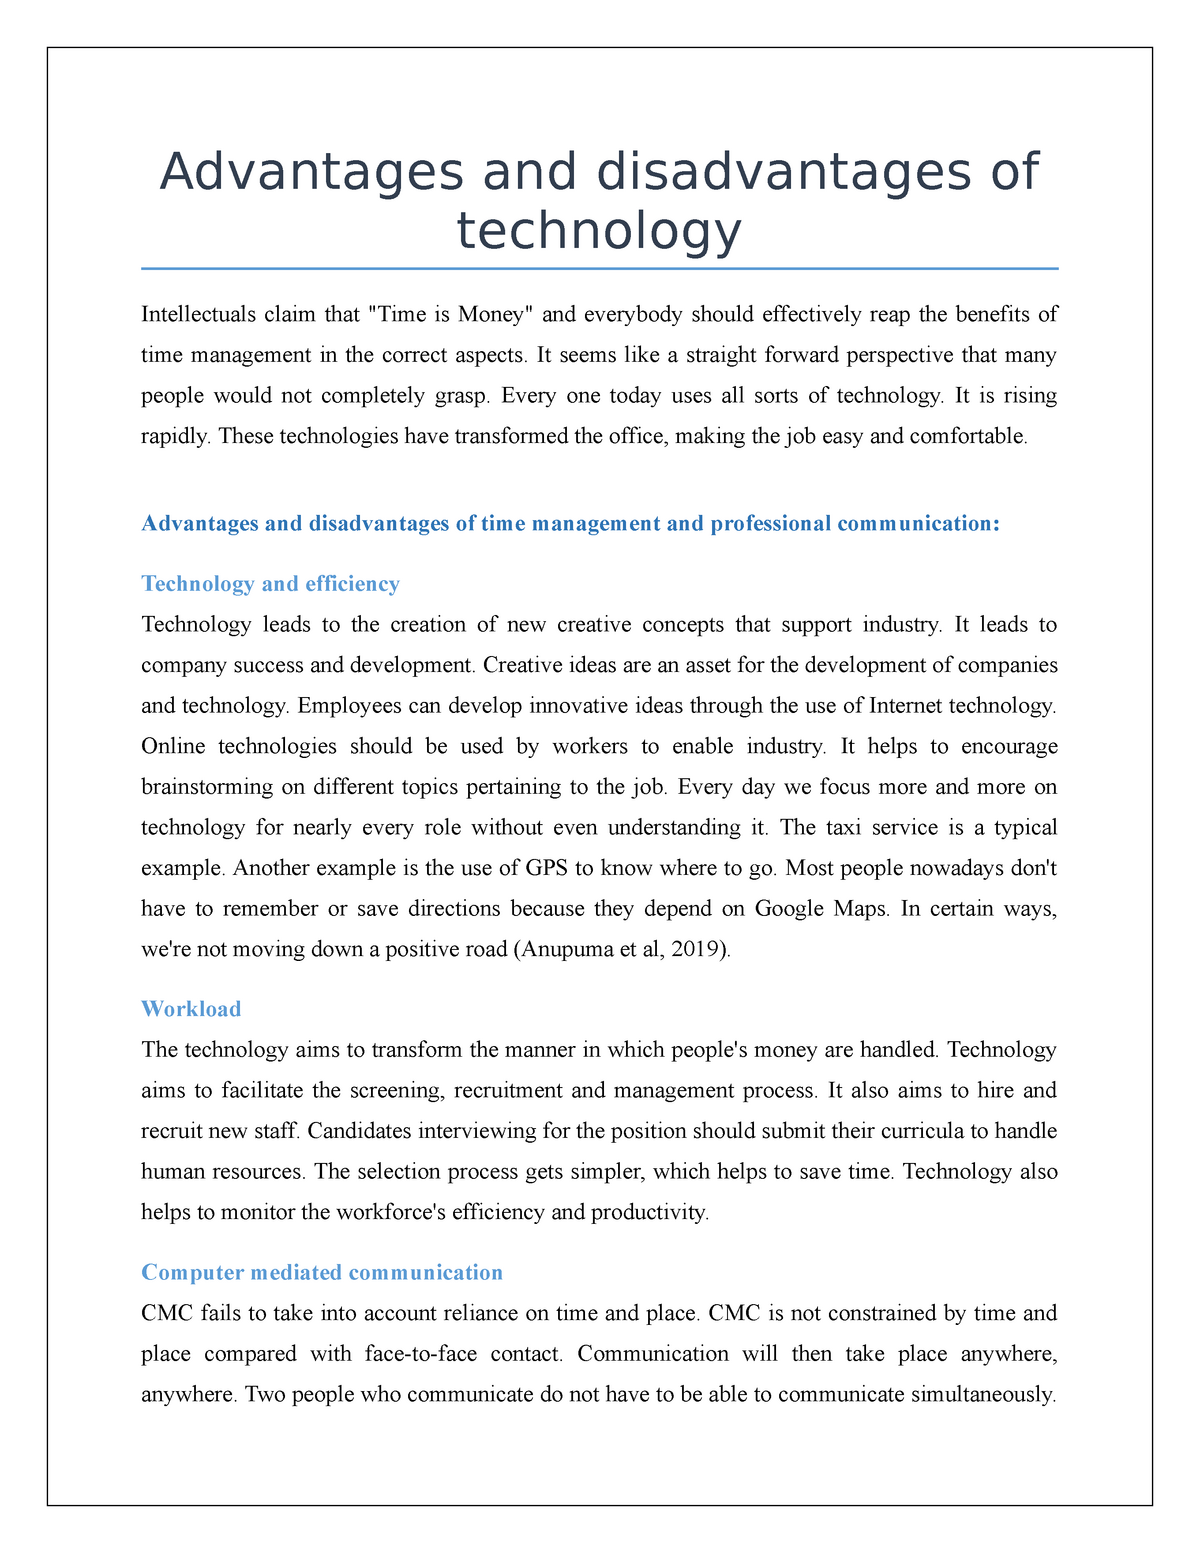 advantages and disadvantages of technology essay 300 words